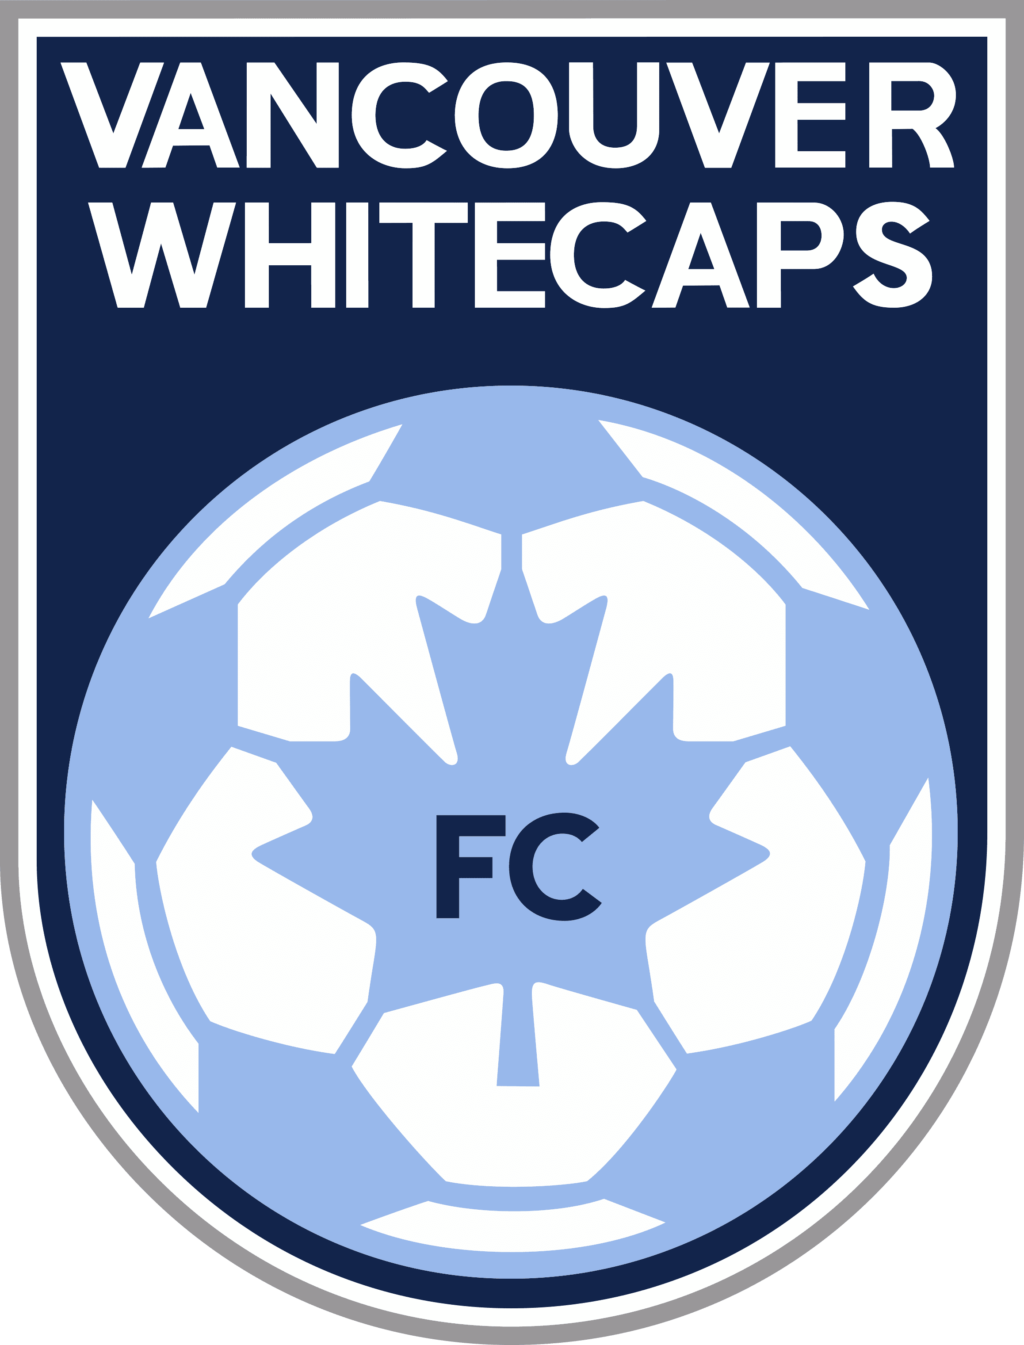 vancouver whitecaps fc 02 1 MLS Vancouver Whitecaps FC SVG, SVG Files For Silhouette, Vancouver Whitecaps FC Files For Cricut, Vancouver Whitecaps FC SVG, DXF, EPS, PNG Instant Download. Vancouver Whitecaps FC SVG, SVG Files For Silhouette, Vancouver Whitecaps FC Files For Cricut, Vancouver Whitecaps FC SVG, DXF, EPS, PNG Instant Download.